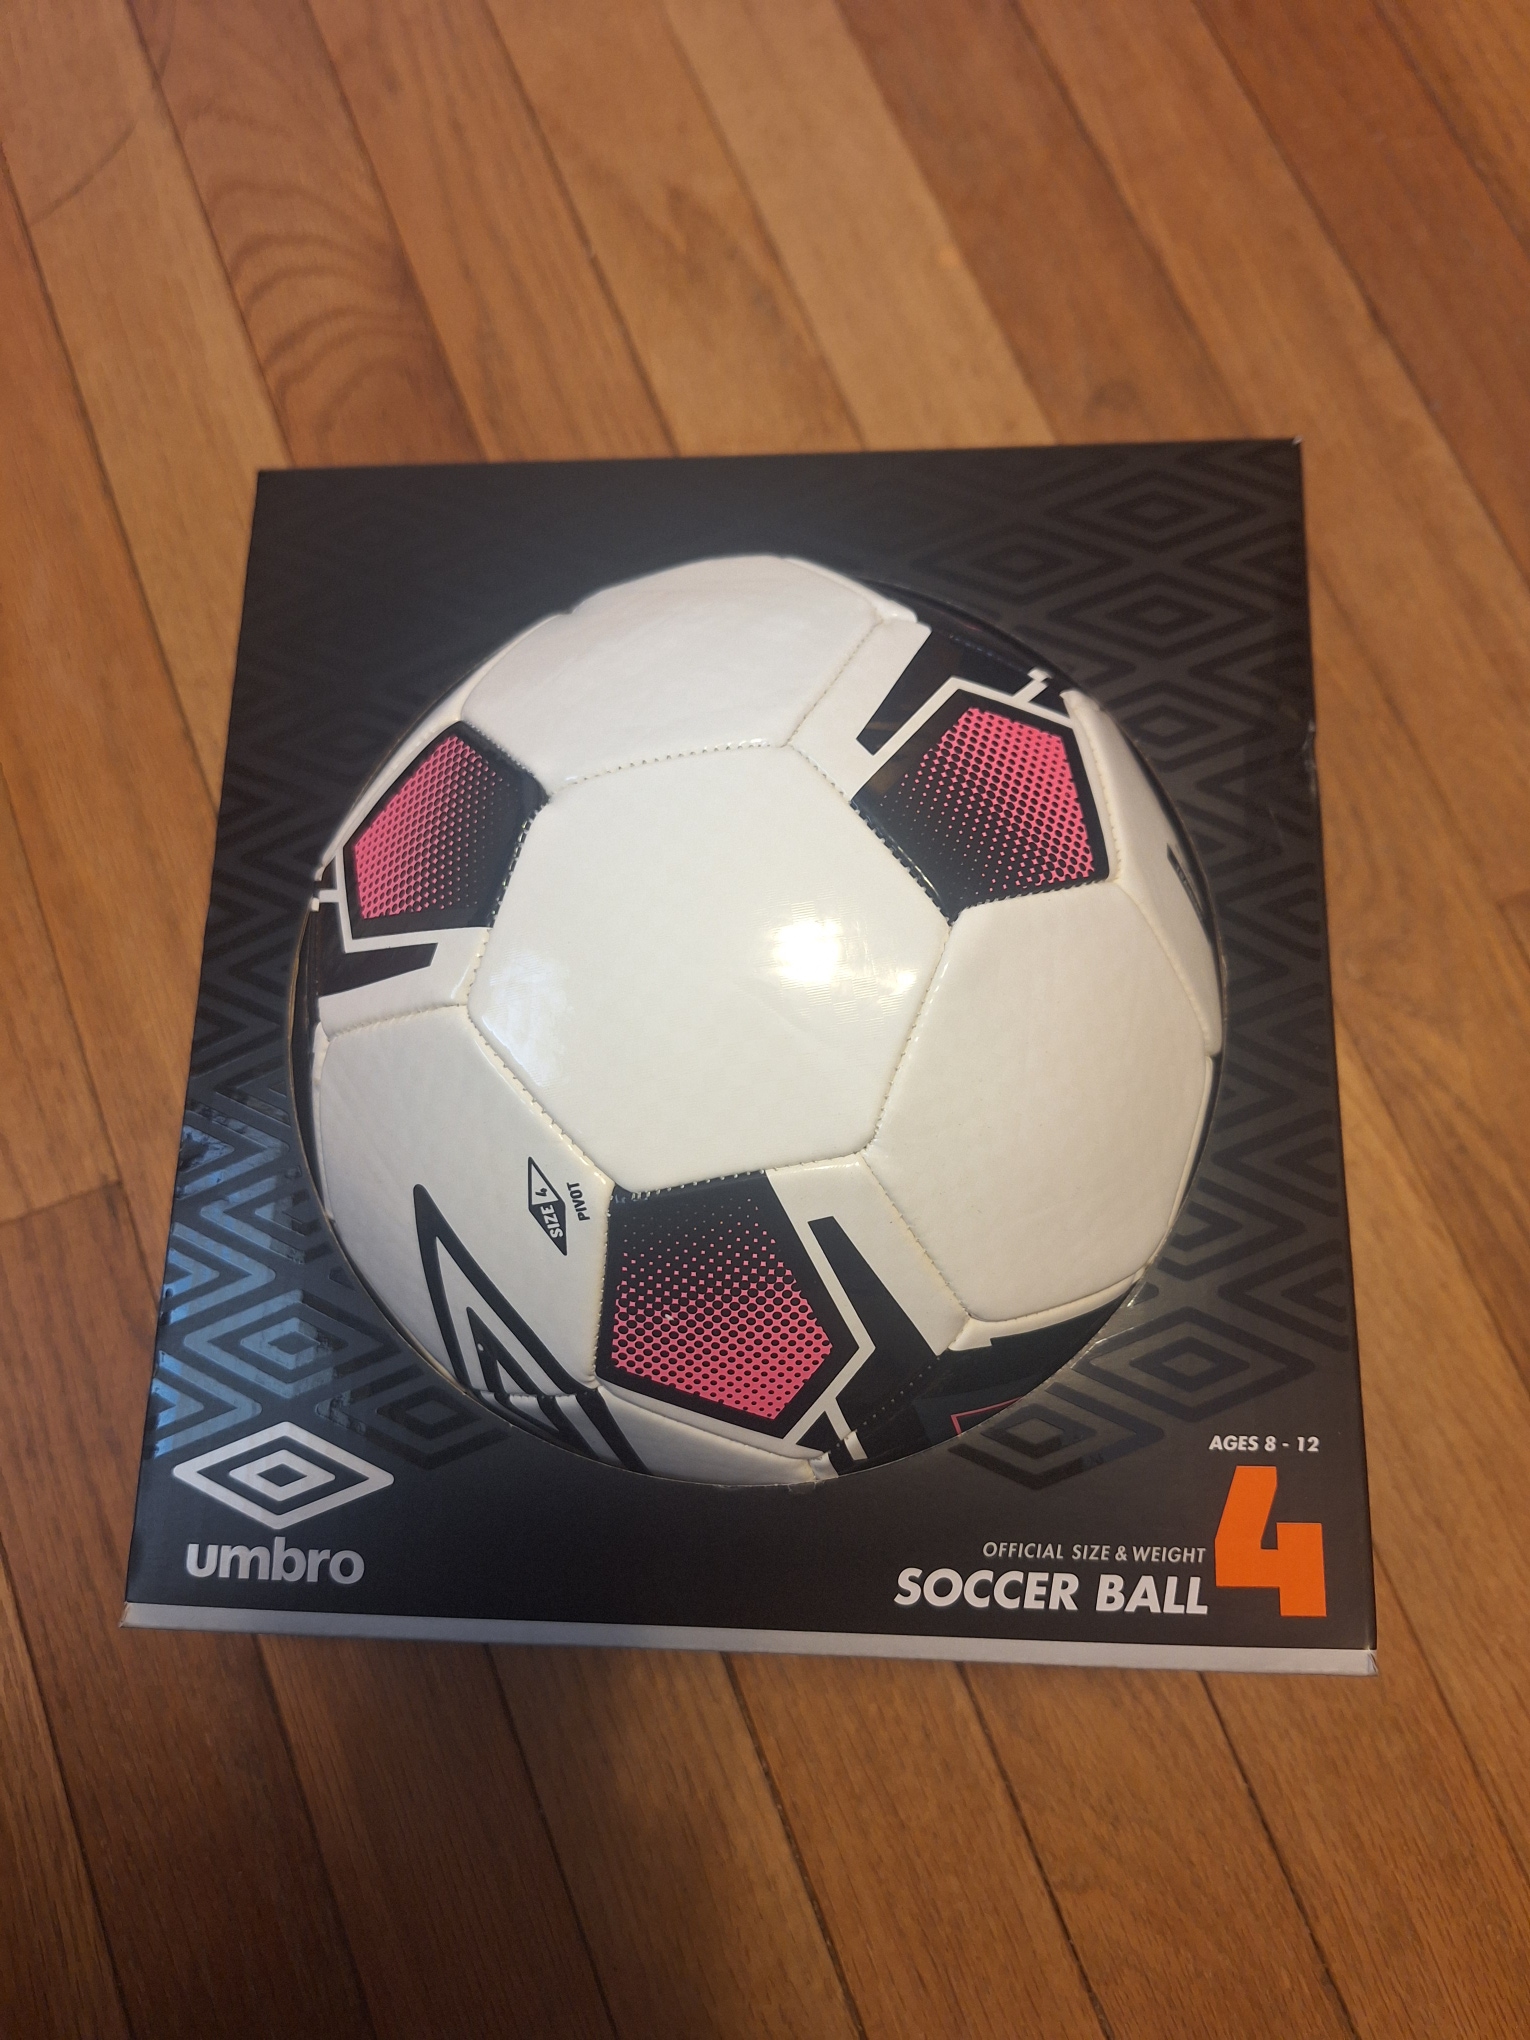 new umbro soccer ball size 4 grass ages 8-12 yrs